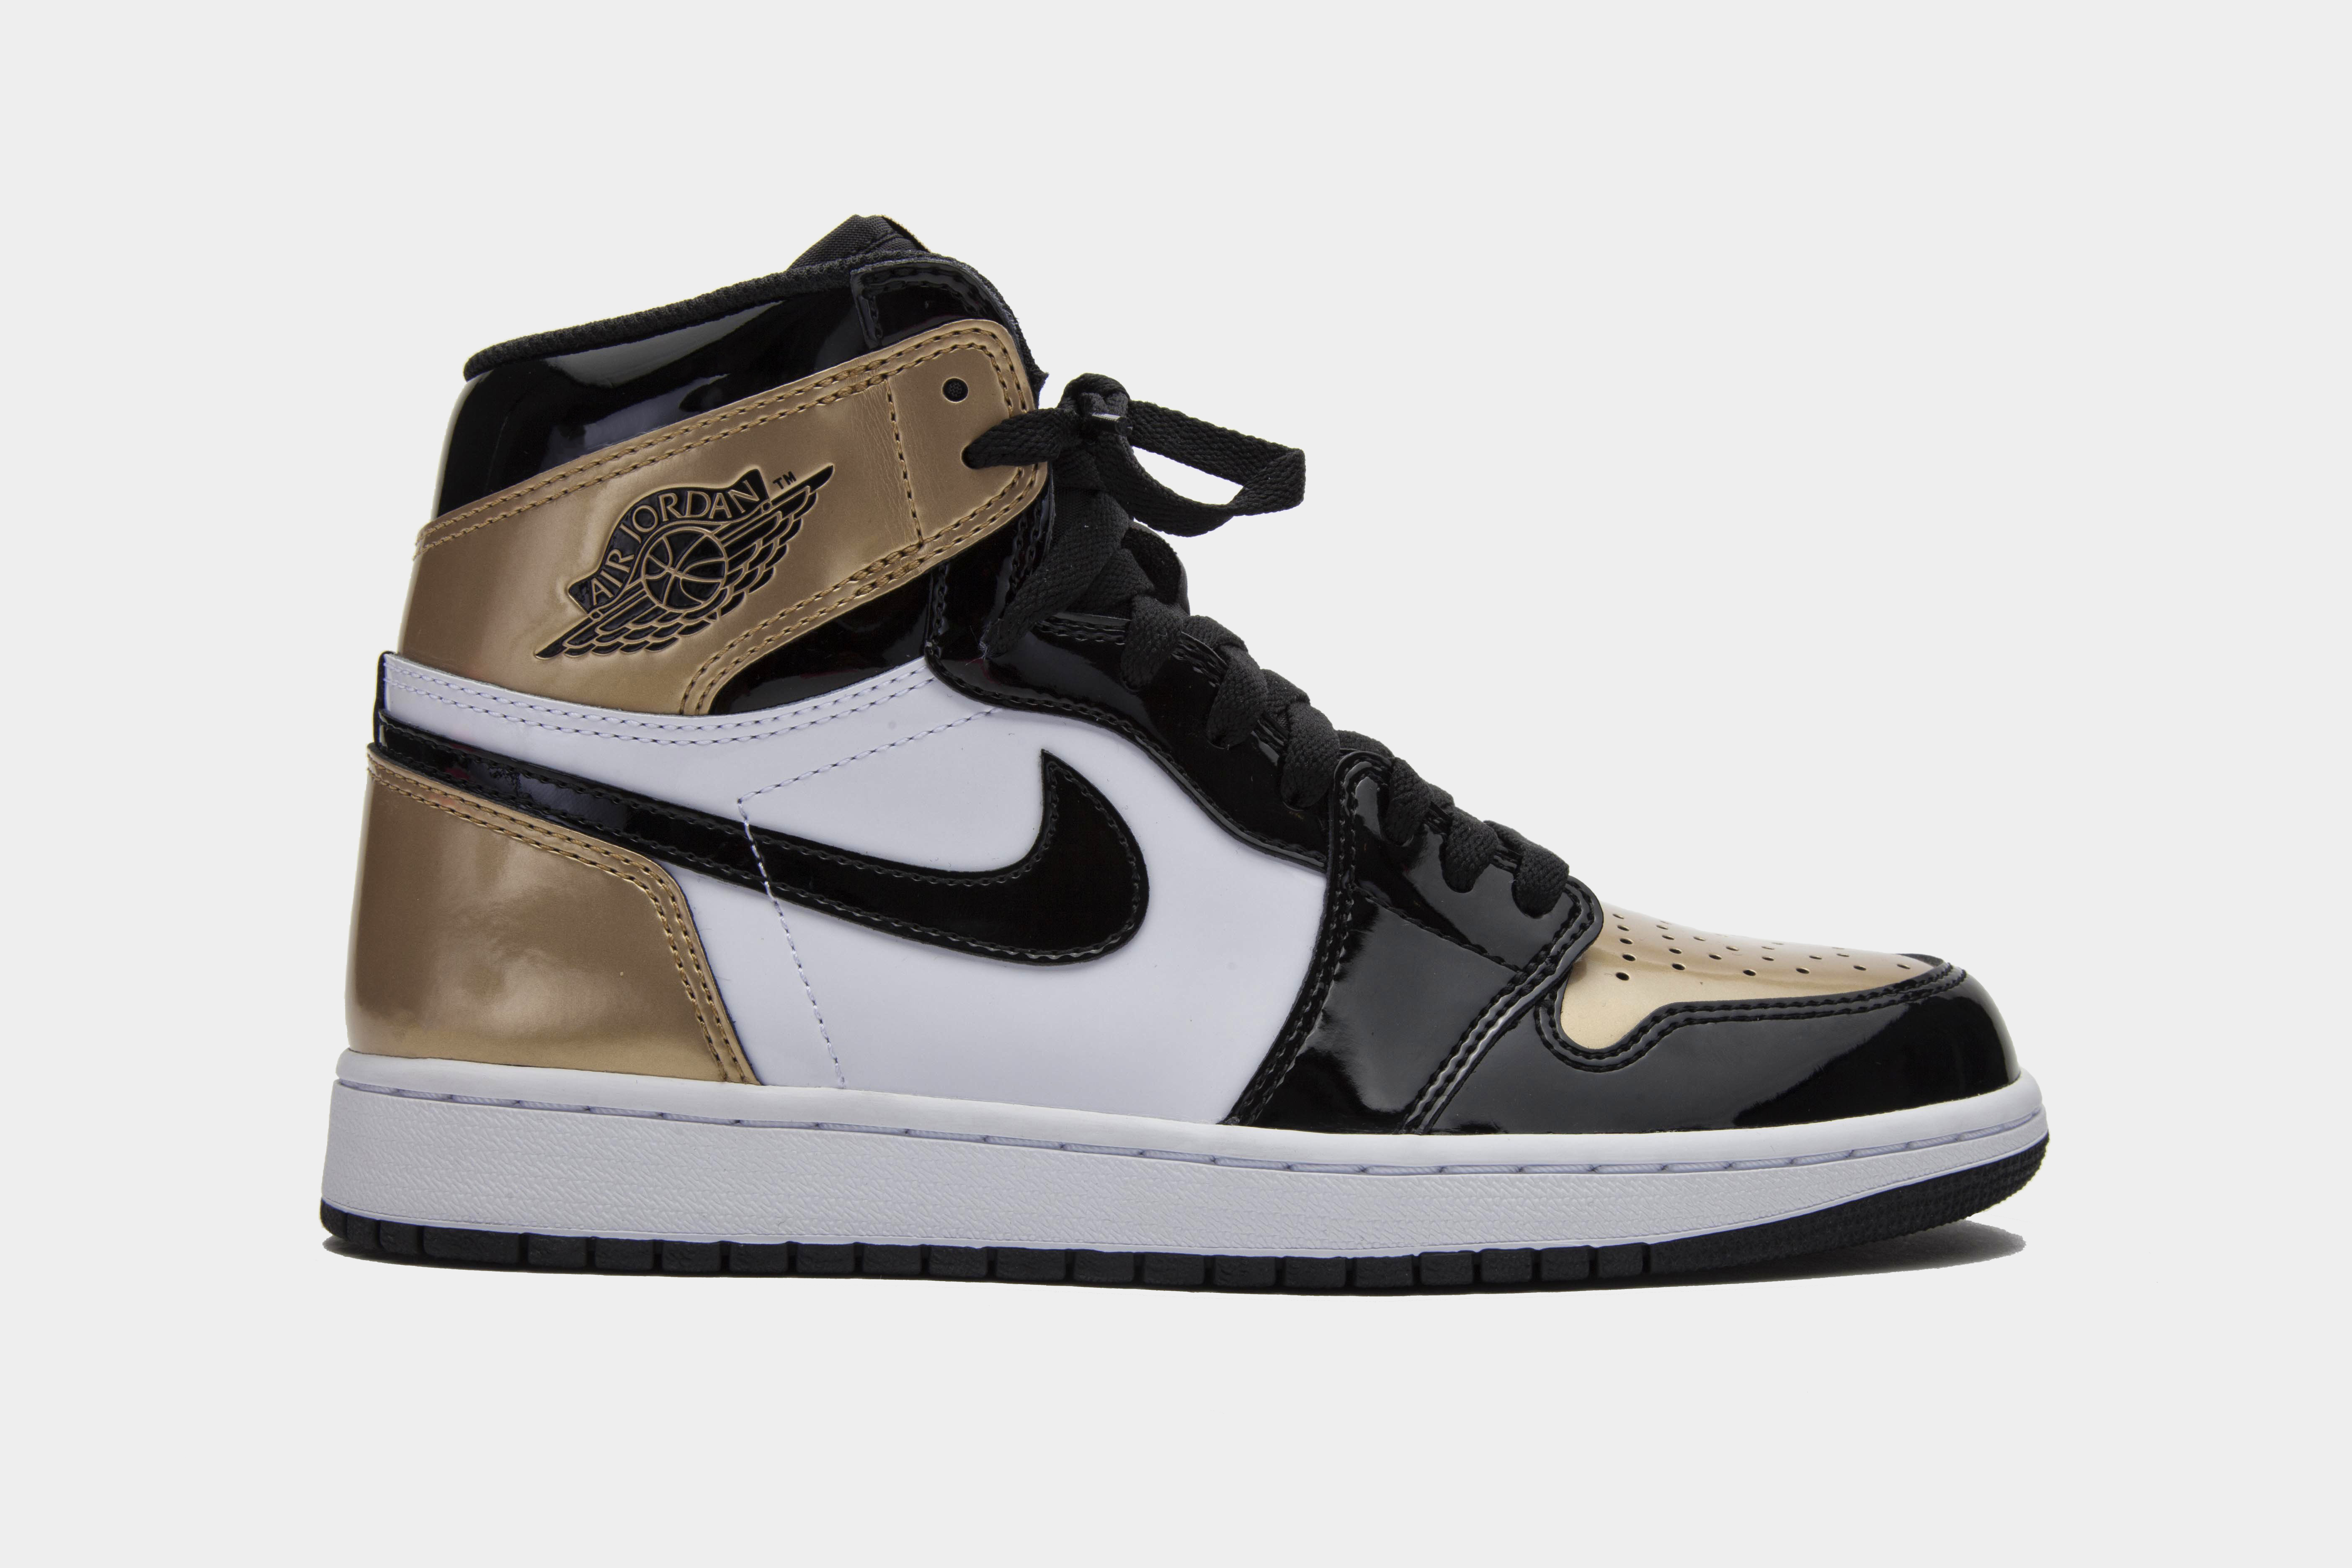 Gold Top 3 Air Jordan 1s Union Release at ComplexCon